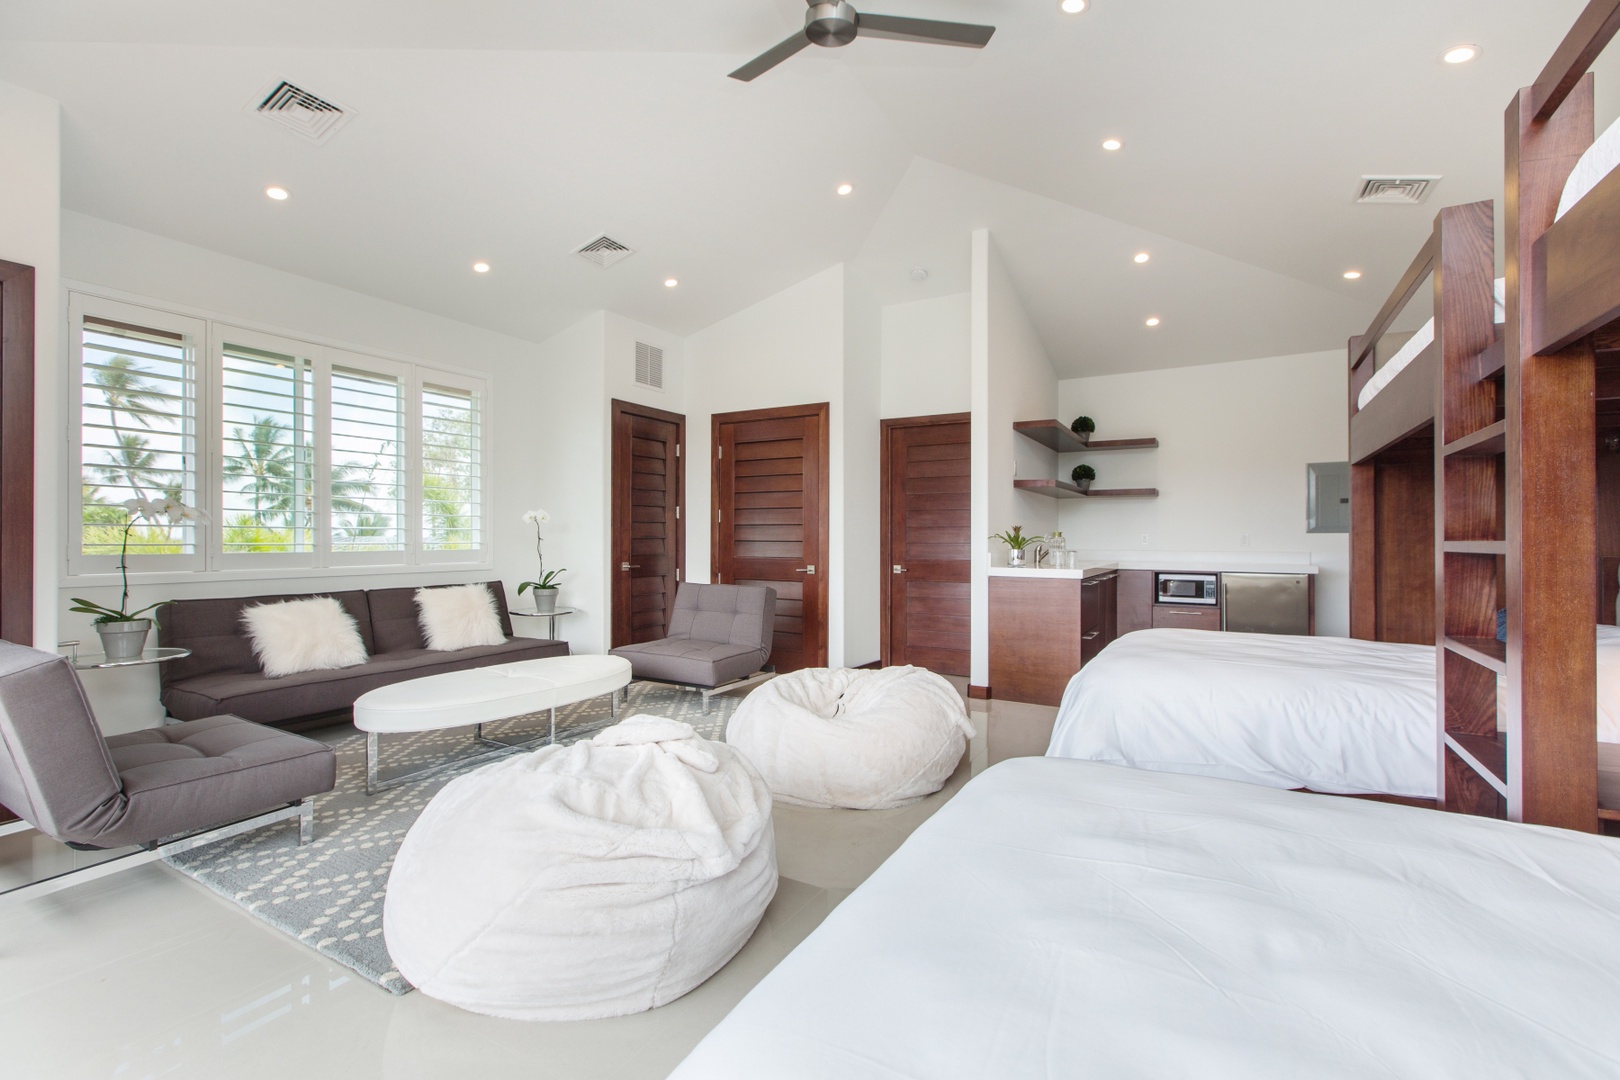 Honolulu Vacation Rentals, Le Reve at Diamond Head* - Bedroom 3 - Kids paradise,separate detached bedroom, with wet-bar, en-suite,  2 queen beds, 2 twin beds, and a twin sofa bed!